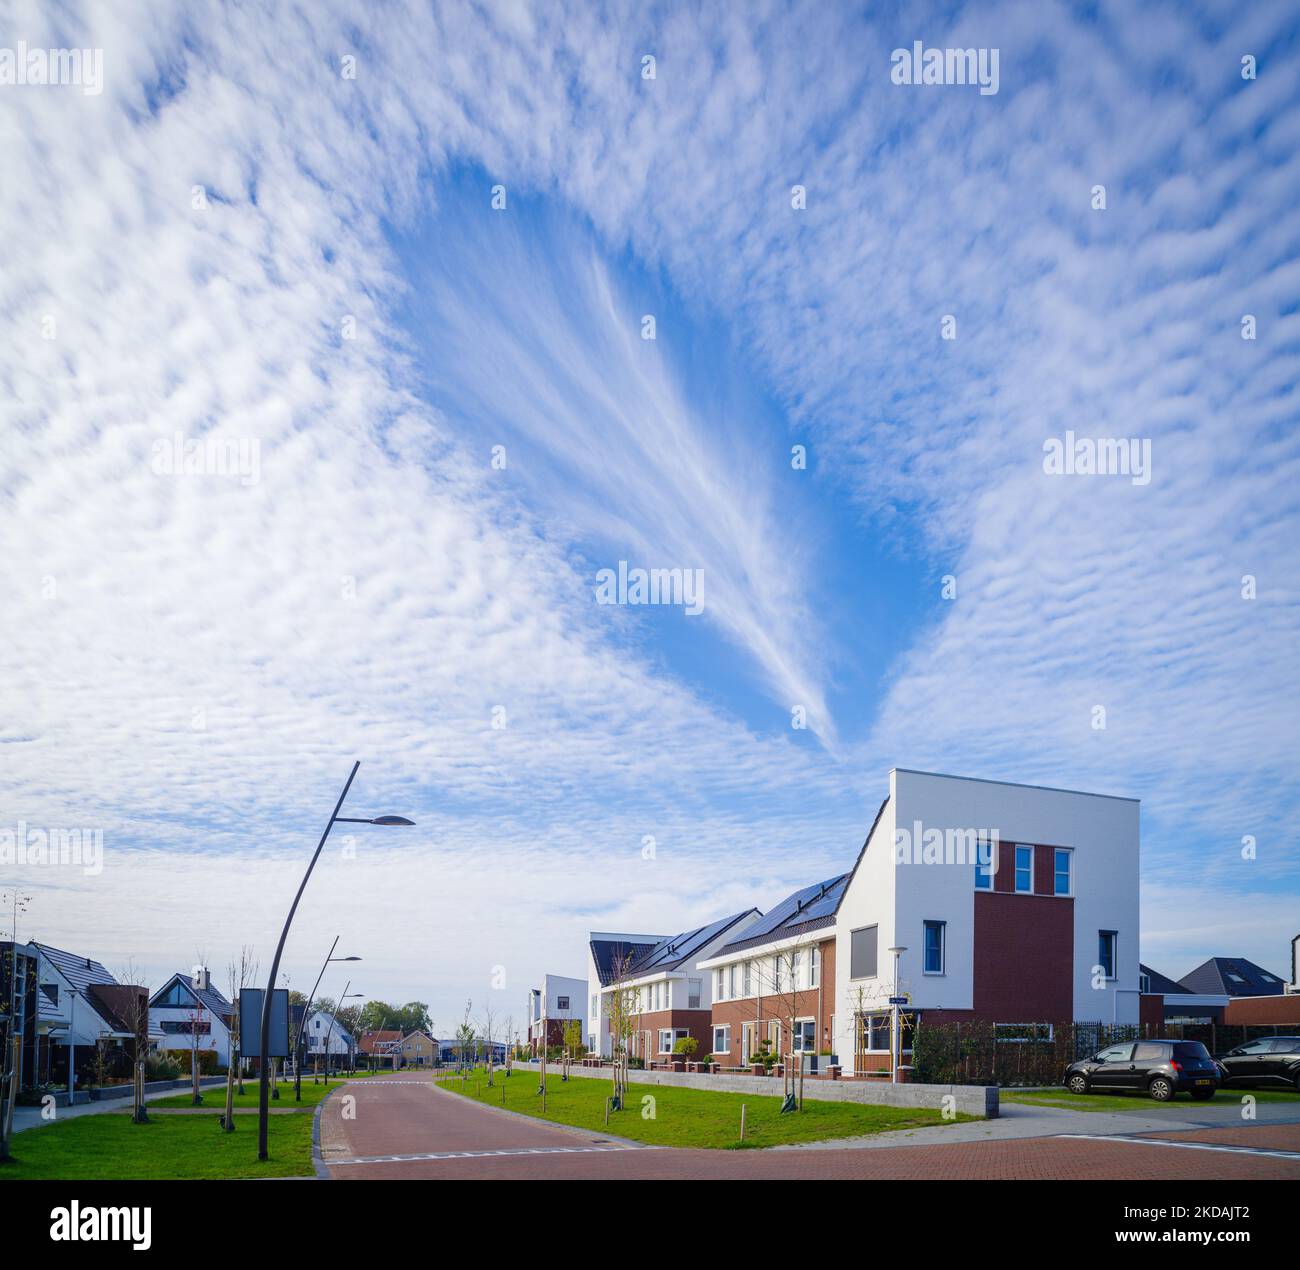 newly built residential area in the Netherlands with some beautiful clouds above Stock Photo